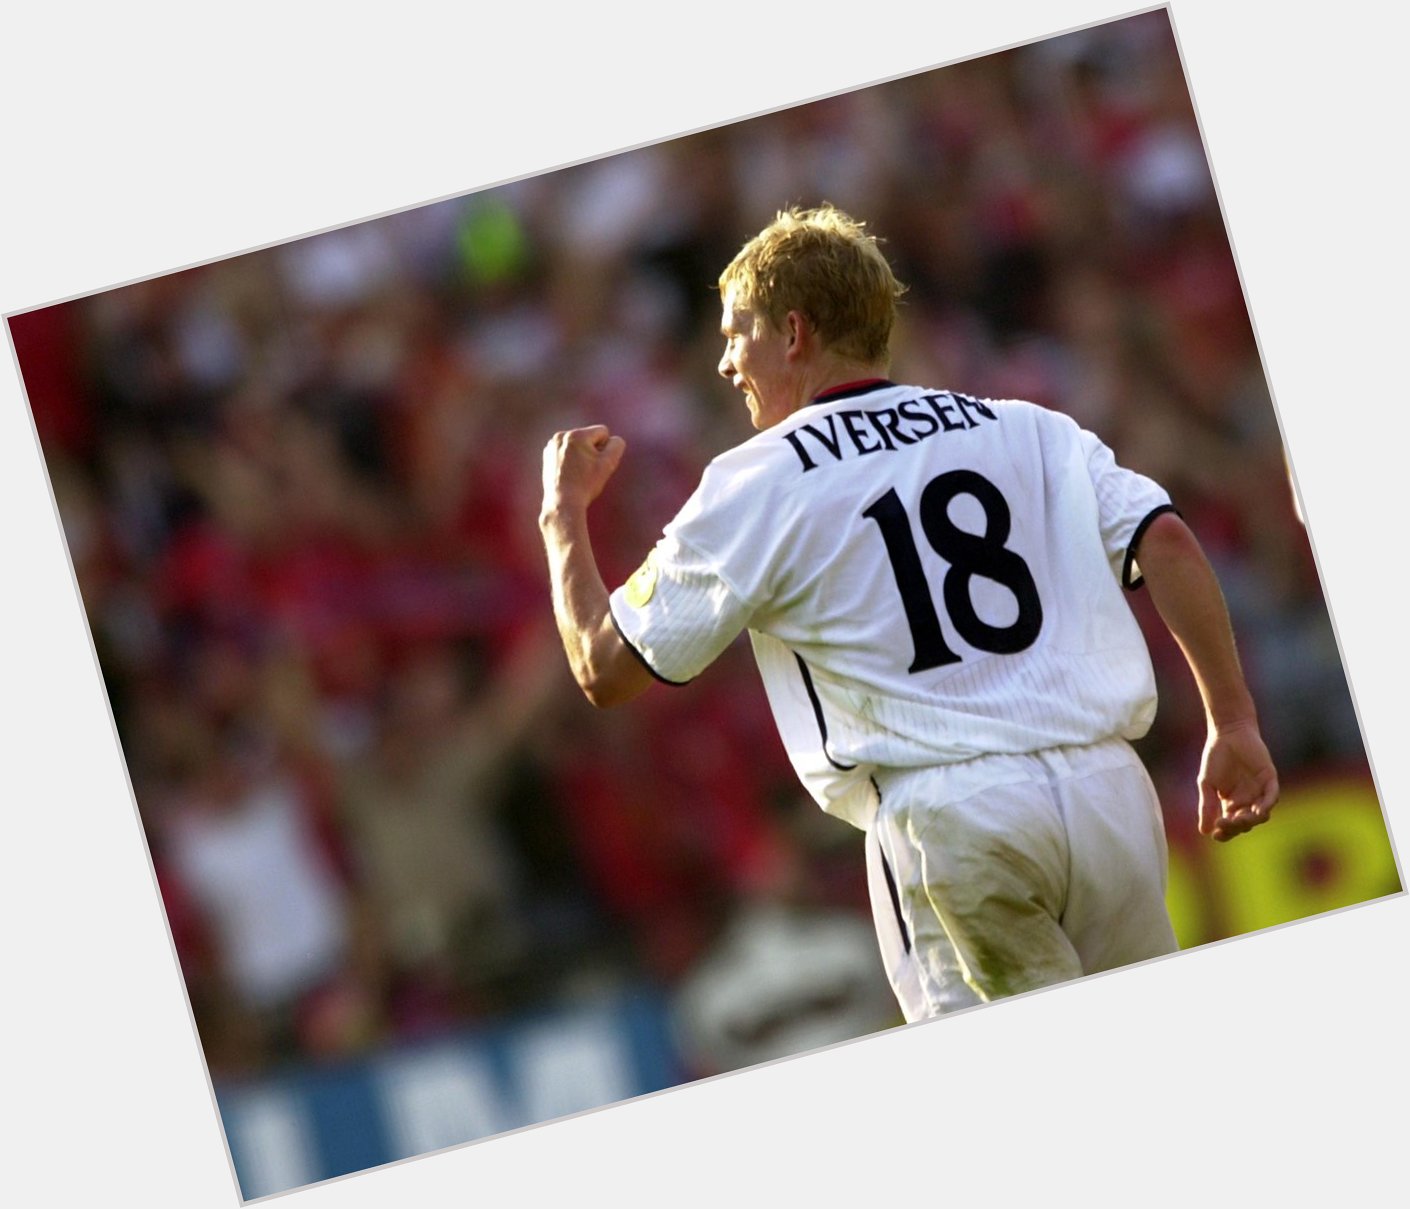 . just reminded me: Happy birthday to Steffen Iversen. 39 years old. Our only goalscorer in a EURO! 